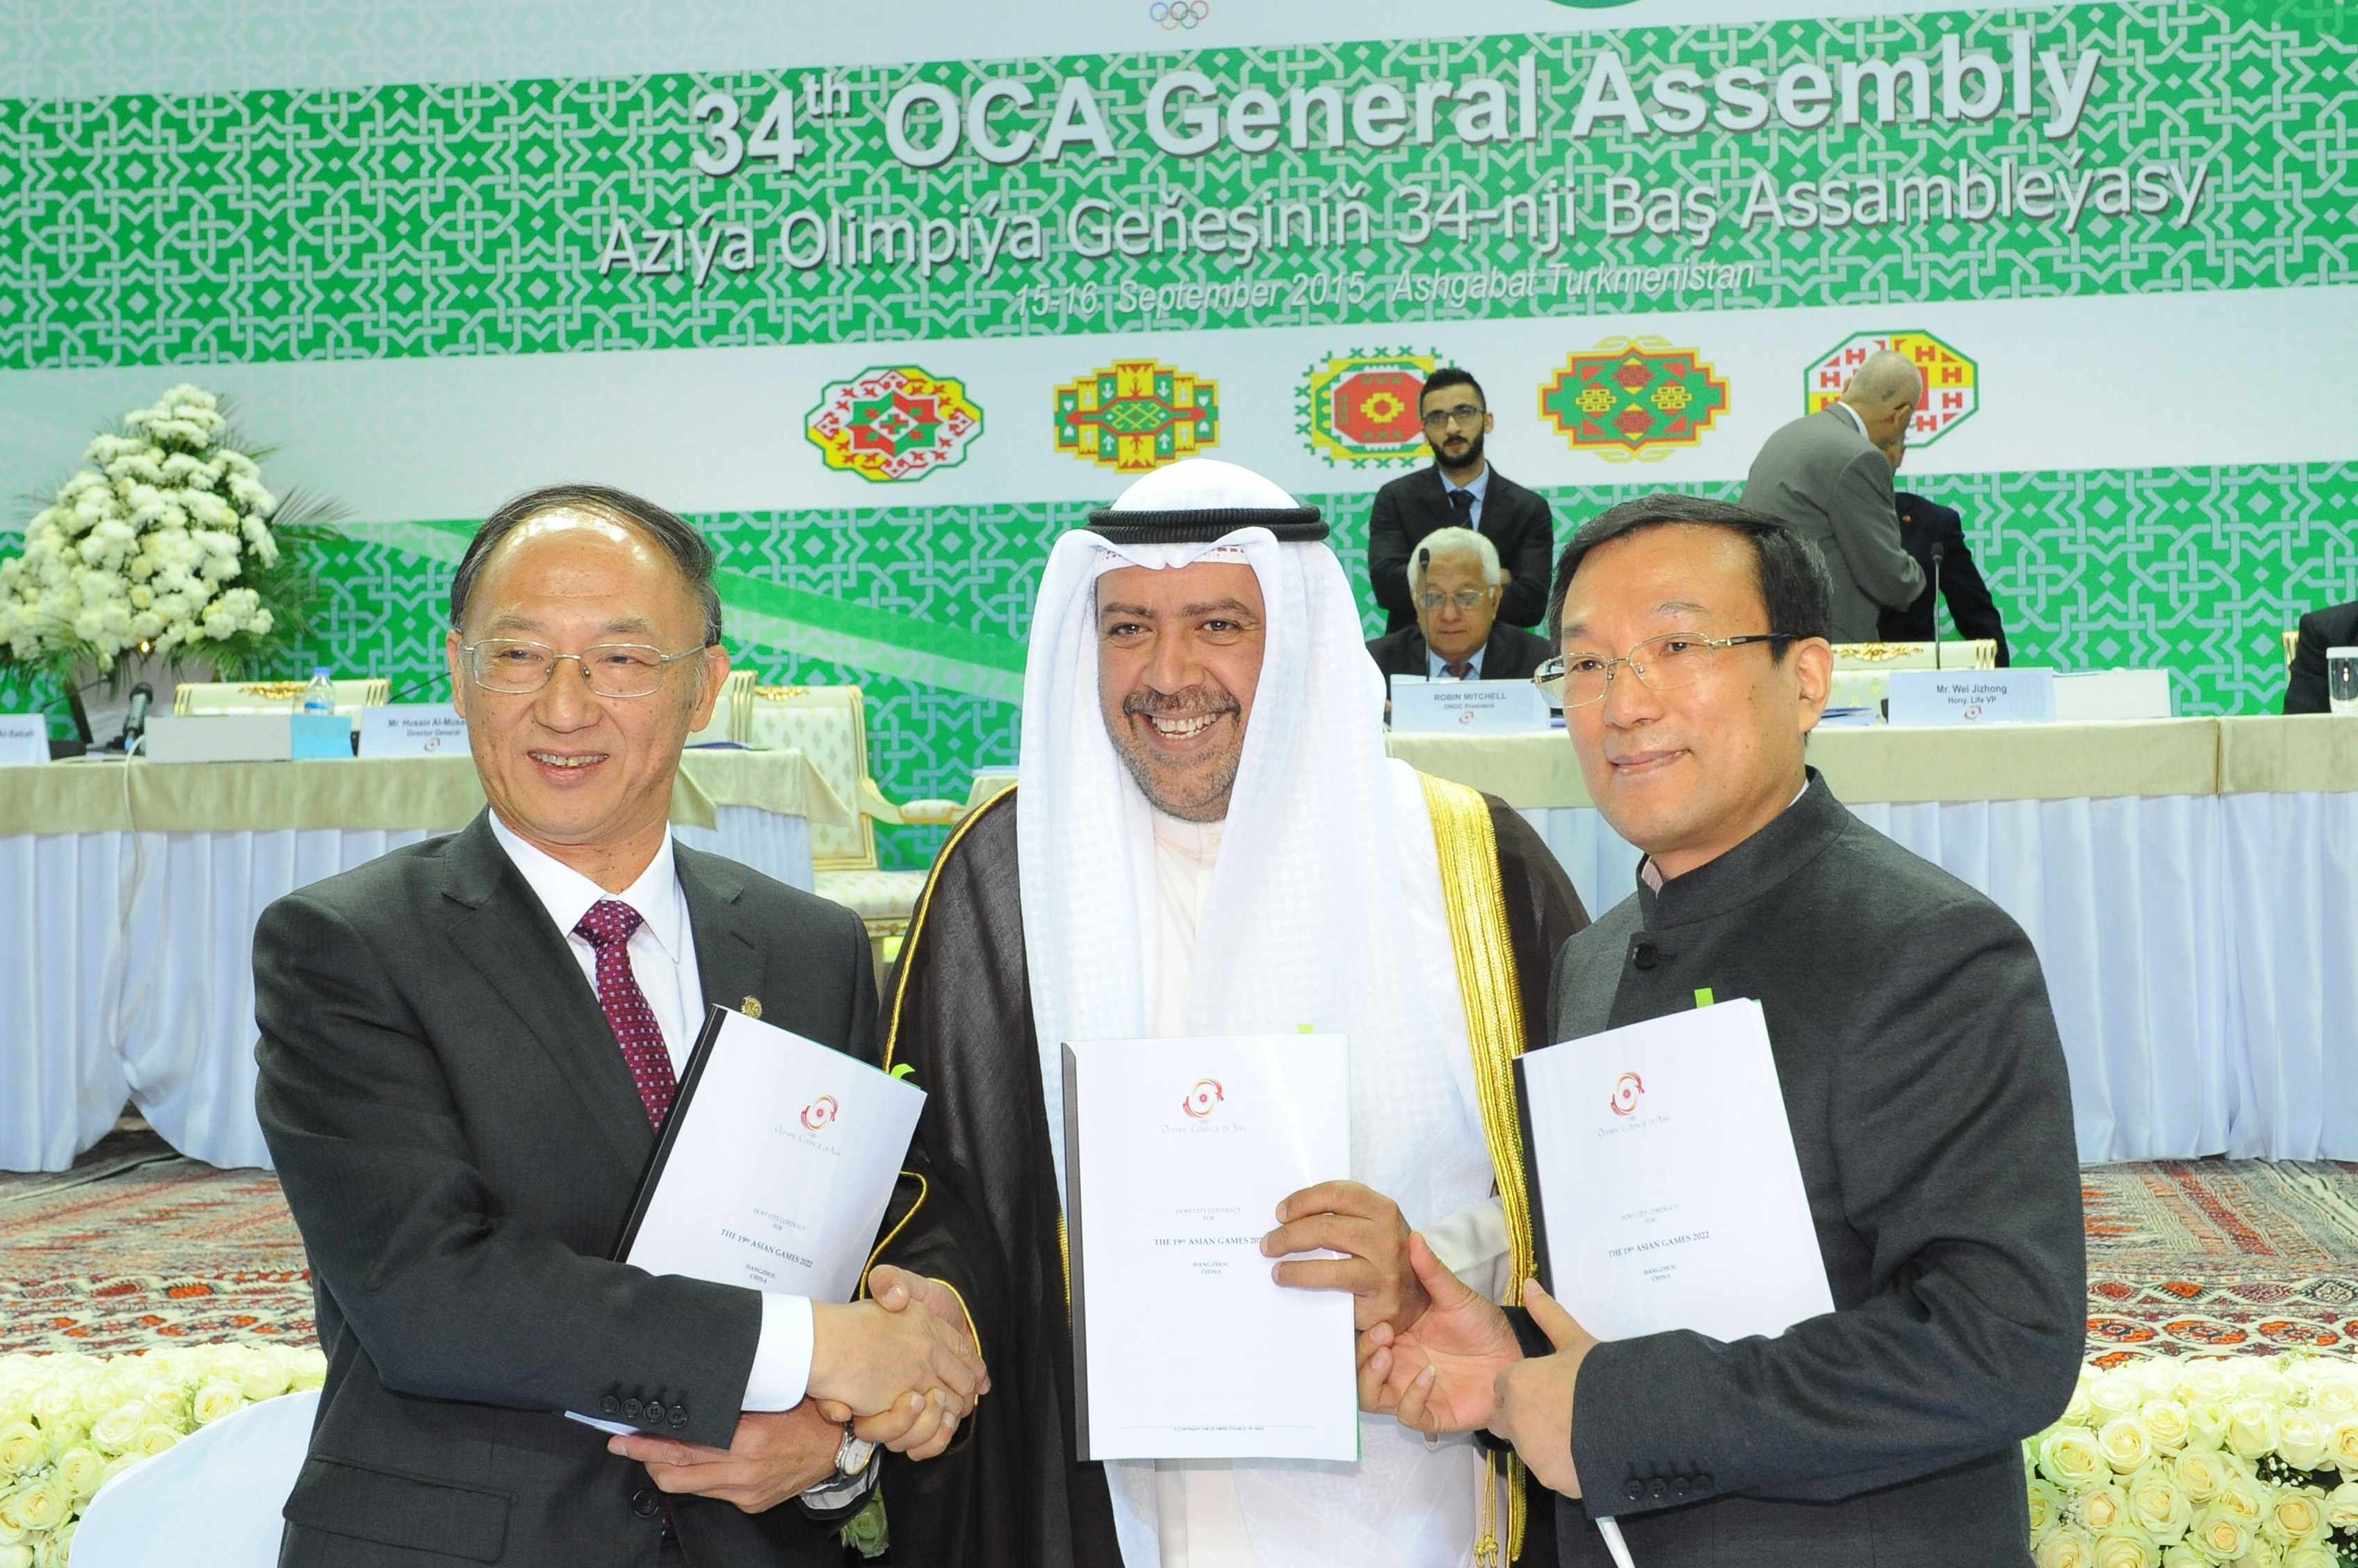 From left, Minister of Sport of China Liu Peng, President of the Olympic Council of Asia Shiekh Ahmad Al-Fahad Al-Sabah and Mayor of Hangzhou Zhang Hogming shake hands after a signing ceremony in Ashgabat, Turkmenistan, Wednesday, Sept. 16, 2015. The Chinese city of Hangzhou has been confirmed as the host of the 2022 Asian Games after standing as the only candidate. The Olympic Council of Asia signed a contract with officials from the coastal city of almost 9 million people during meetings in Turkmenistan on Wednesday. (AP Photo/ Alexander Vershinin)